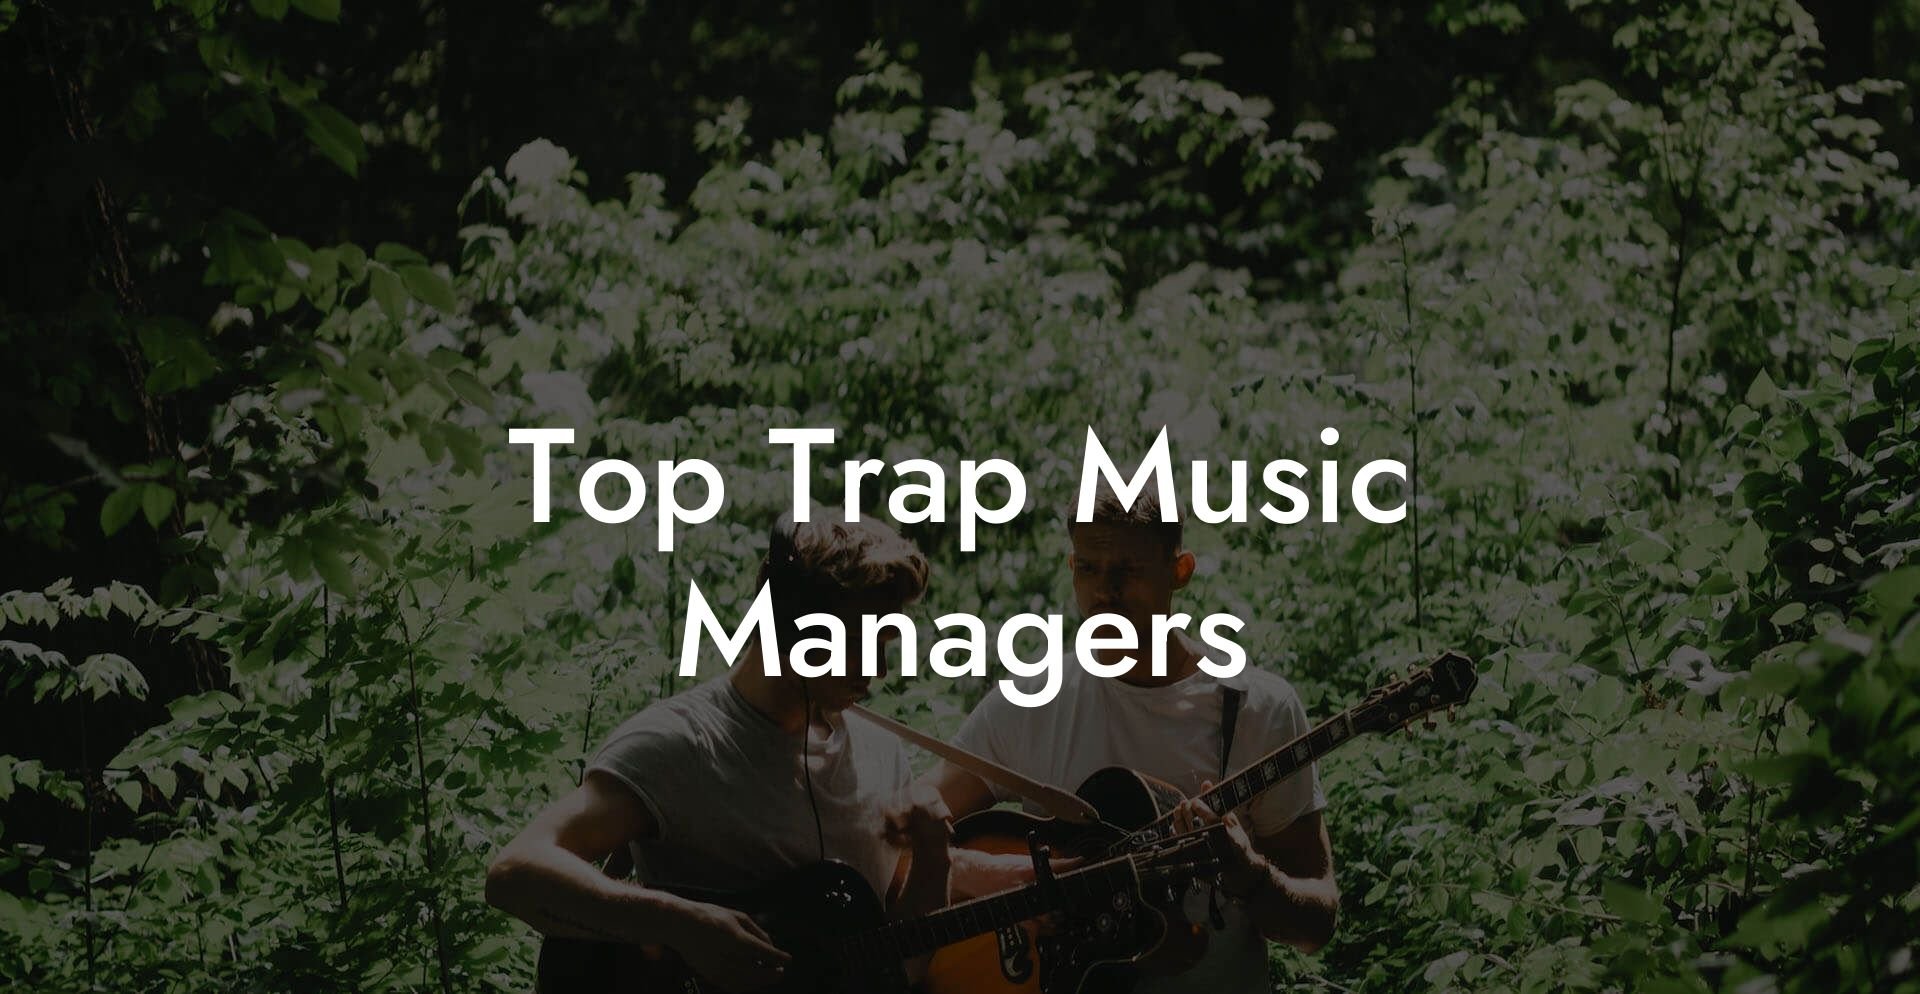 Top Trap Music Managers